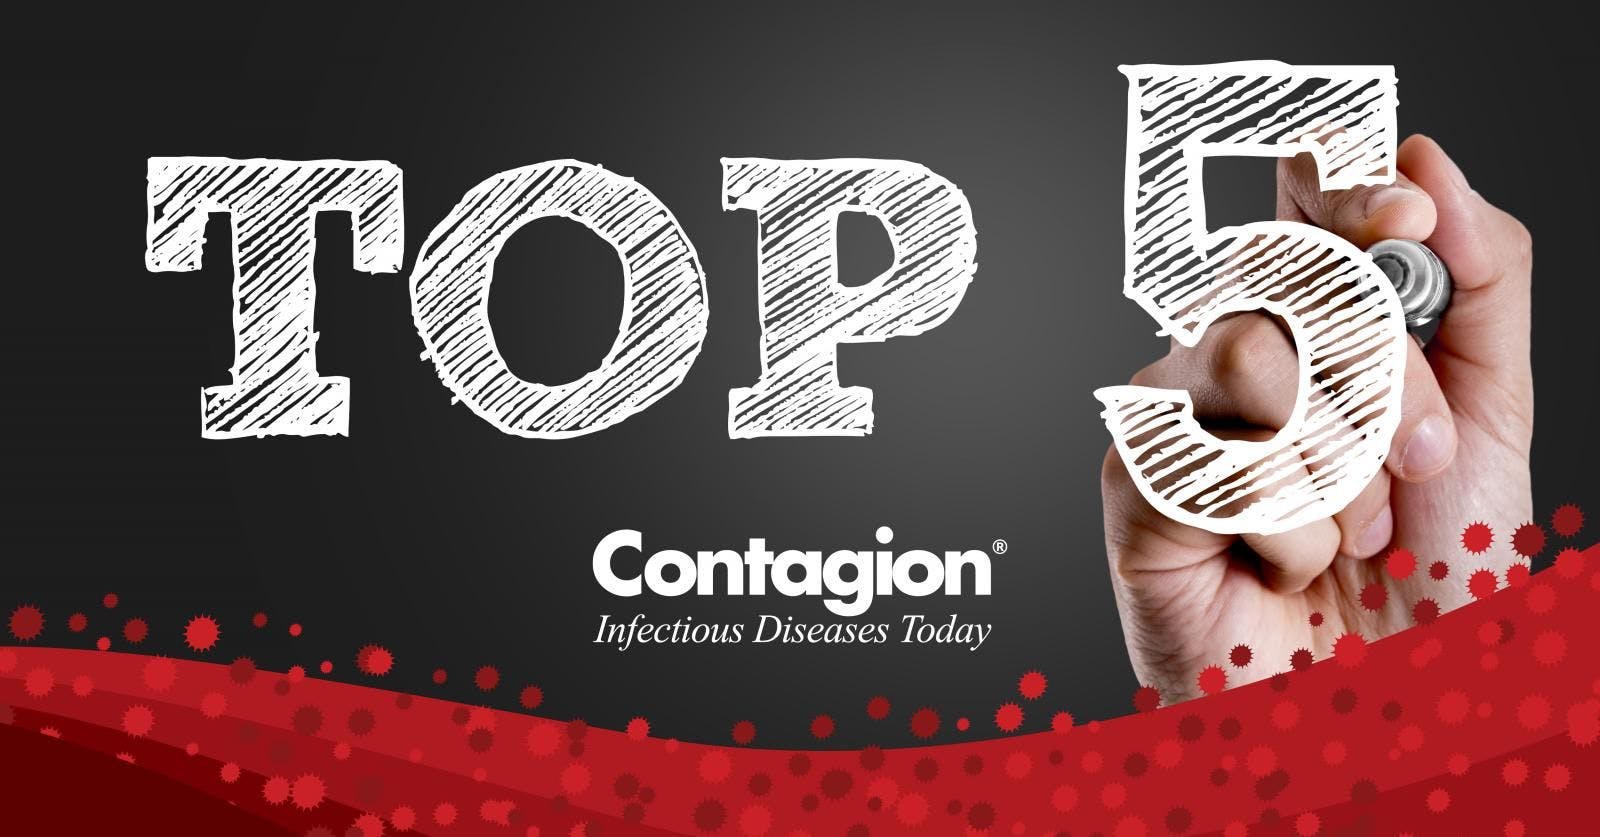 Top Infectious Disease News of the Week&mdash;April 19, 2020